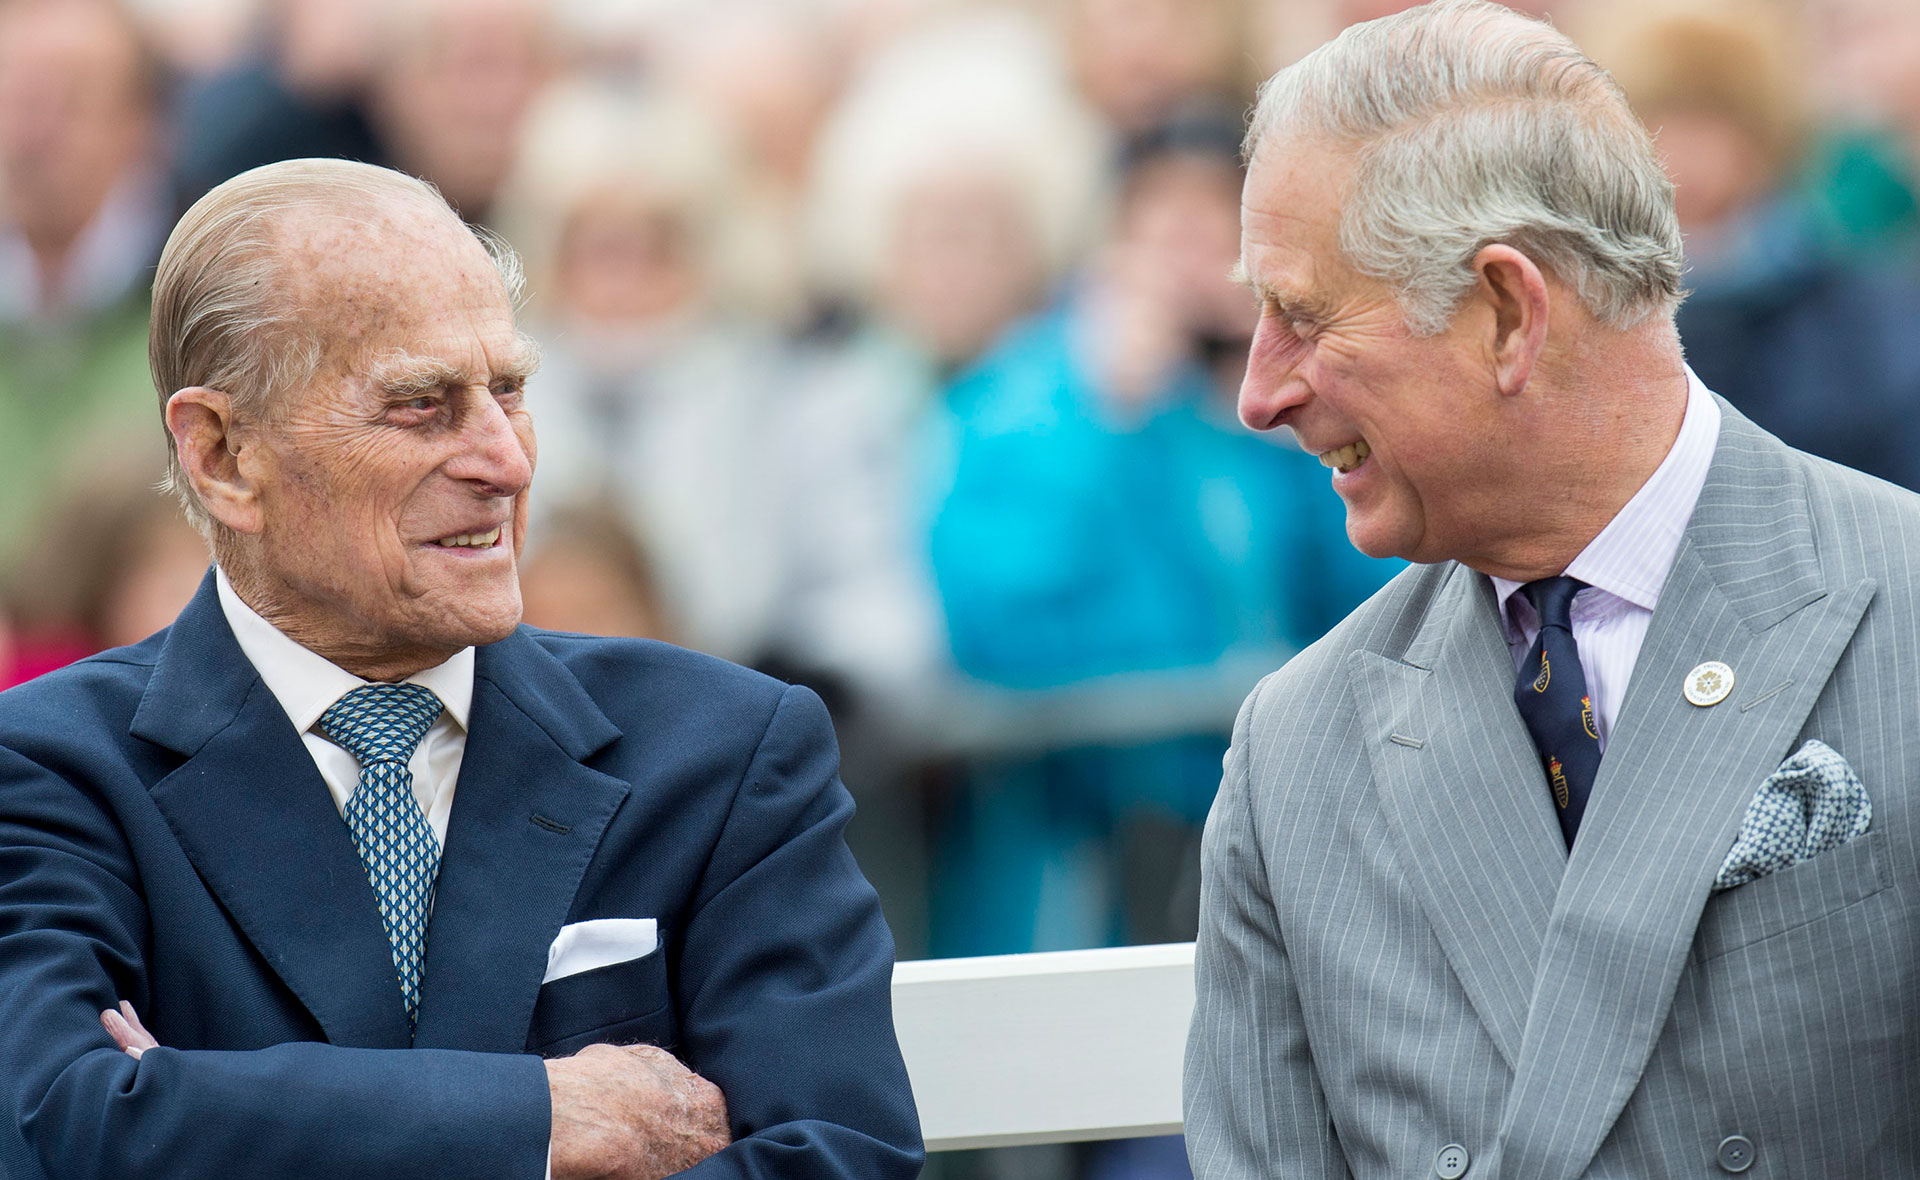 Prince Charles pays a heartfelt tribute to his “dear Papa”, Prince Philip, in touching new video message